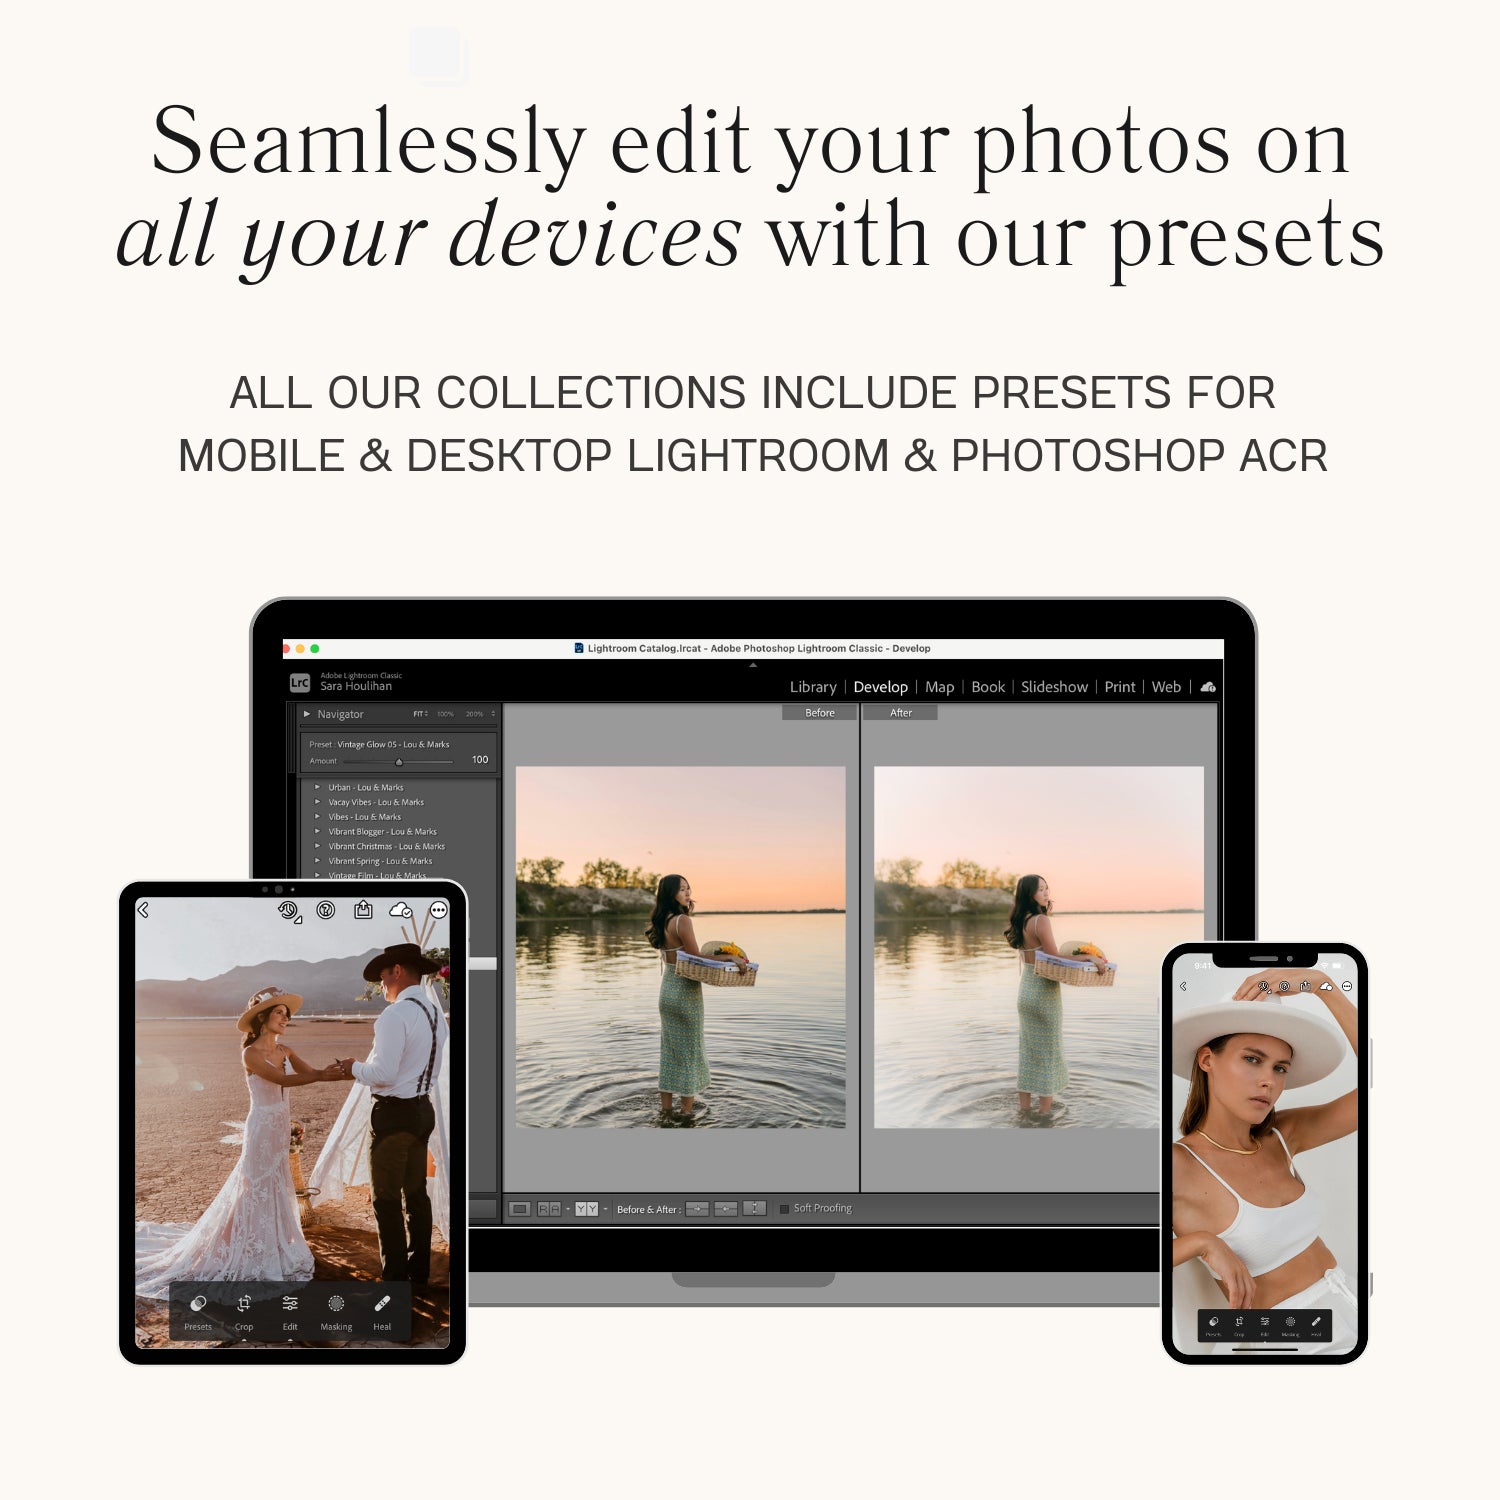 Travel Beachcore Beach Lightroom Presets The Best Photo Editing Preset Filters For Lightroom Mobile And Desktop For Photographers and Instagram Influencers By Lou And Marks Presets